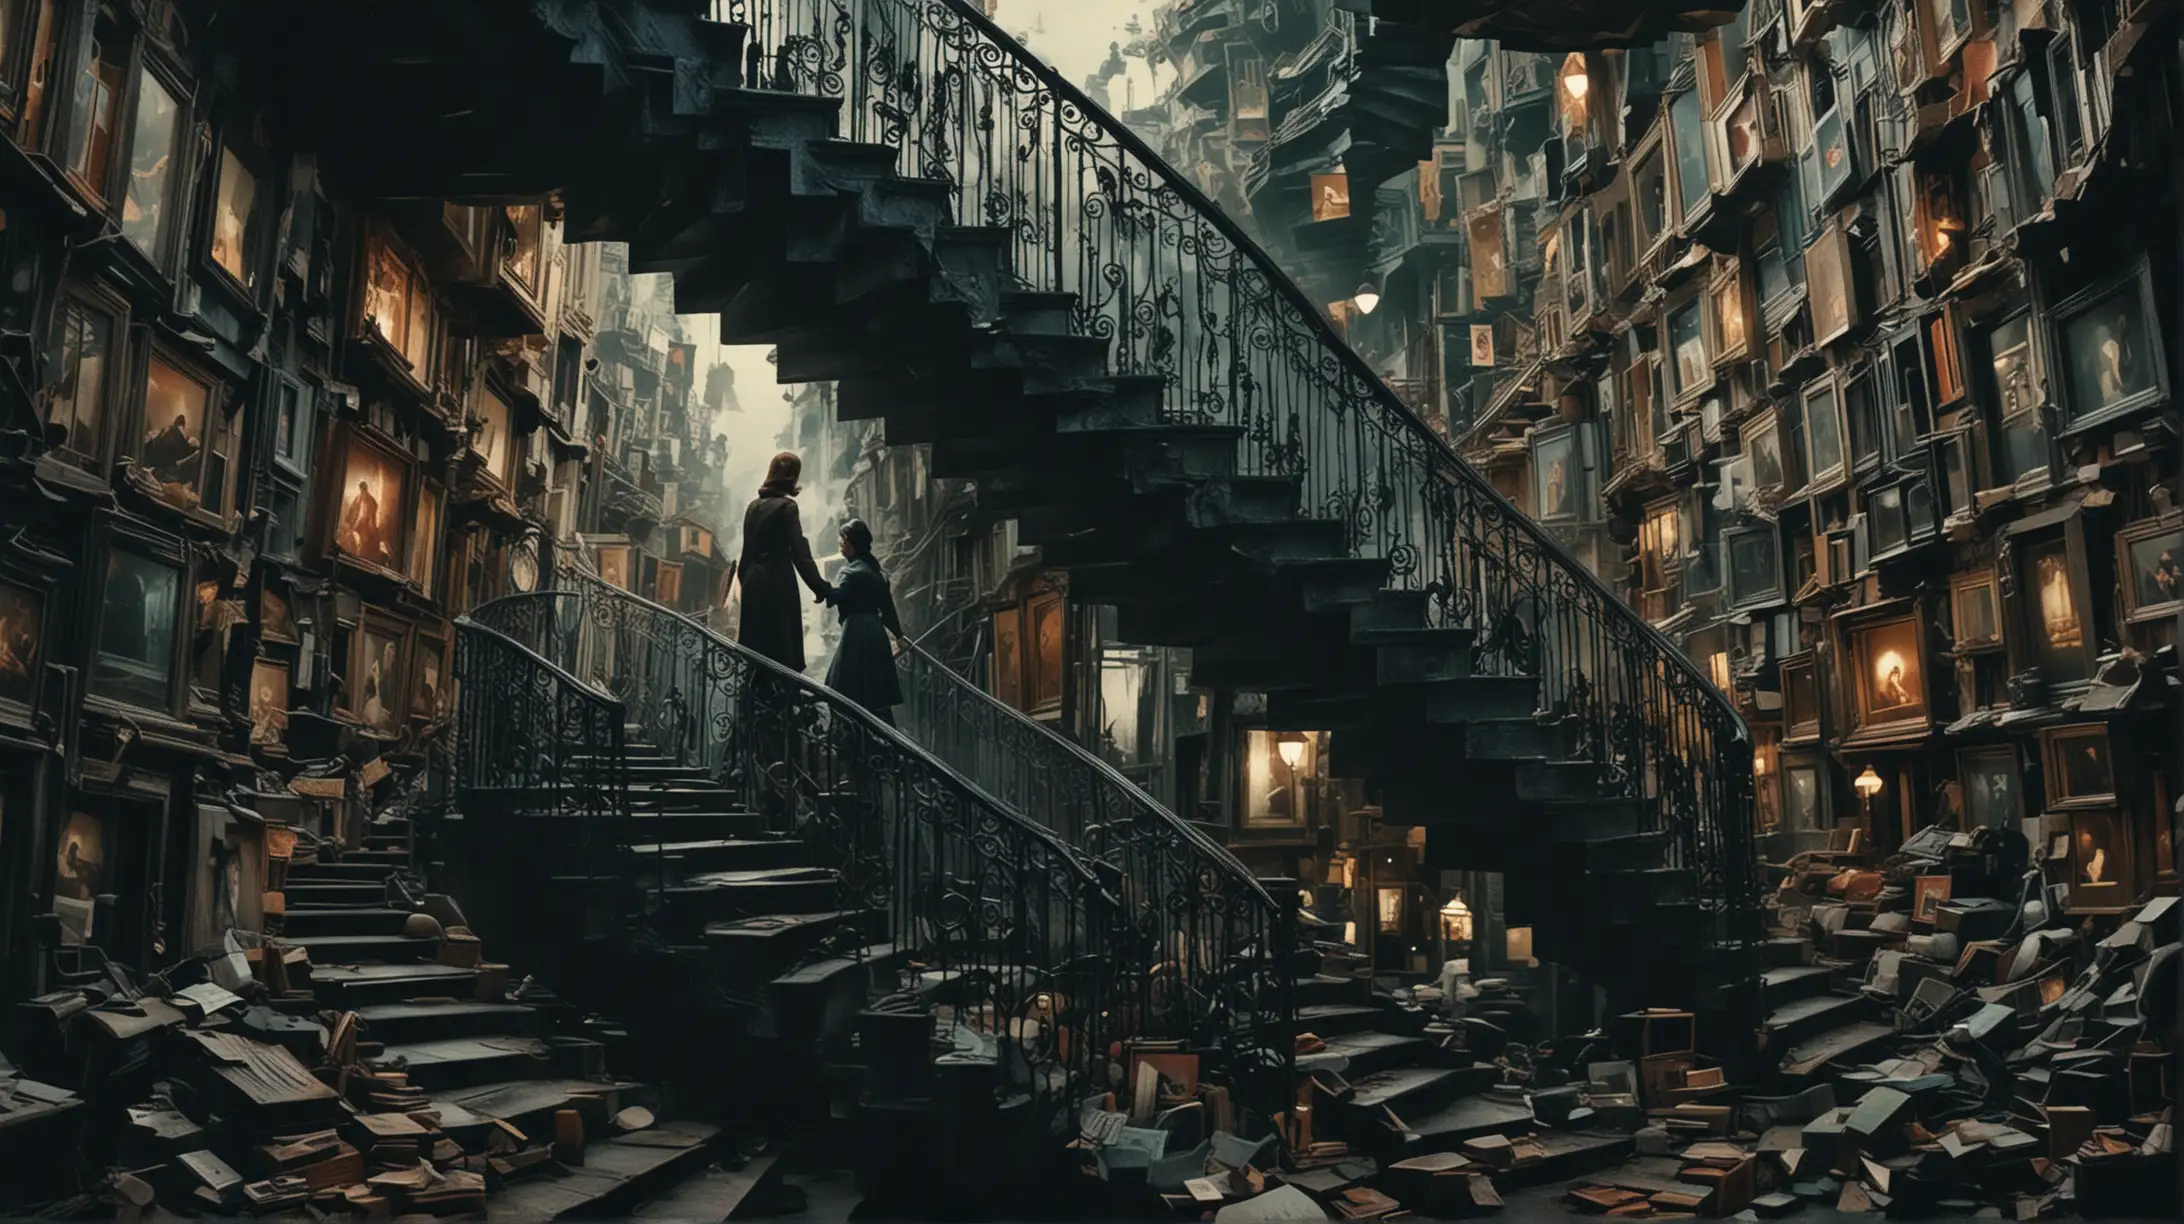 Surreal Montage of Cinematic Landscapes Swirling Staircases and Fragmented Faces